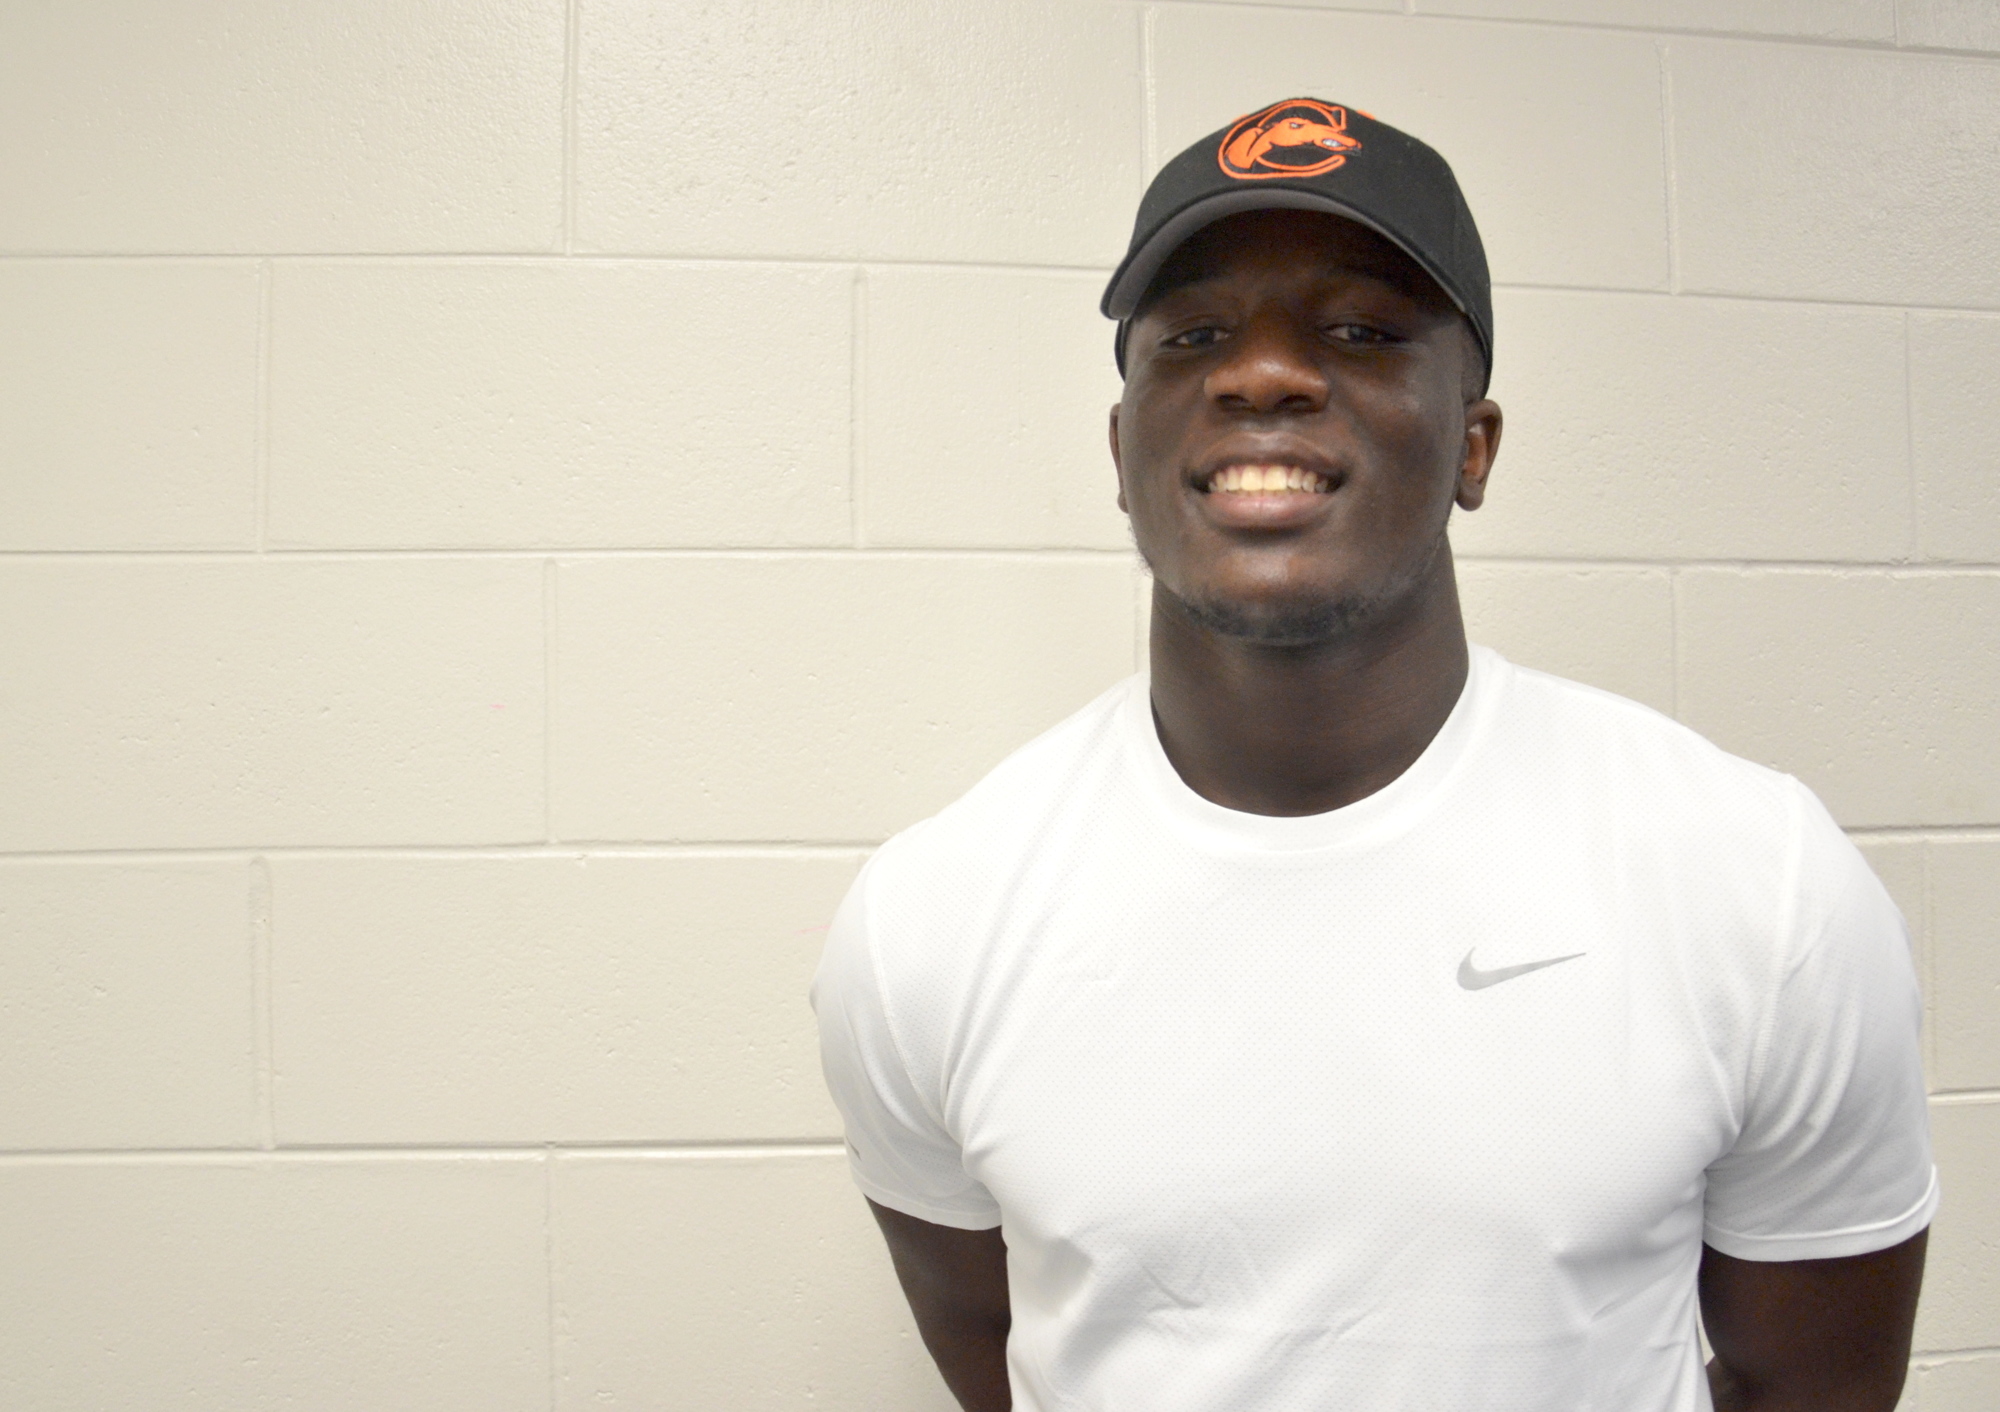 D.J. Charles is all smiles about starting his career at Campbell University.